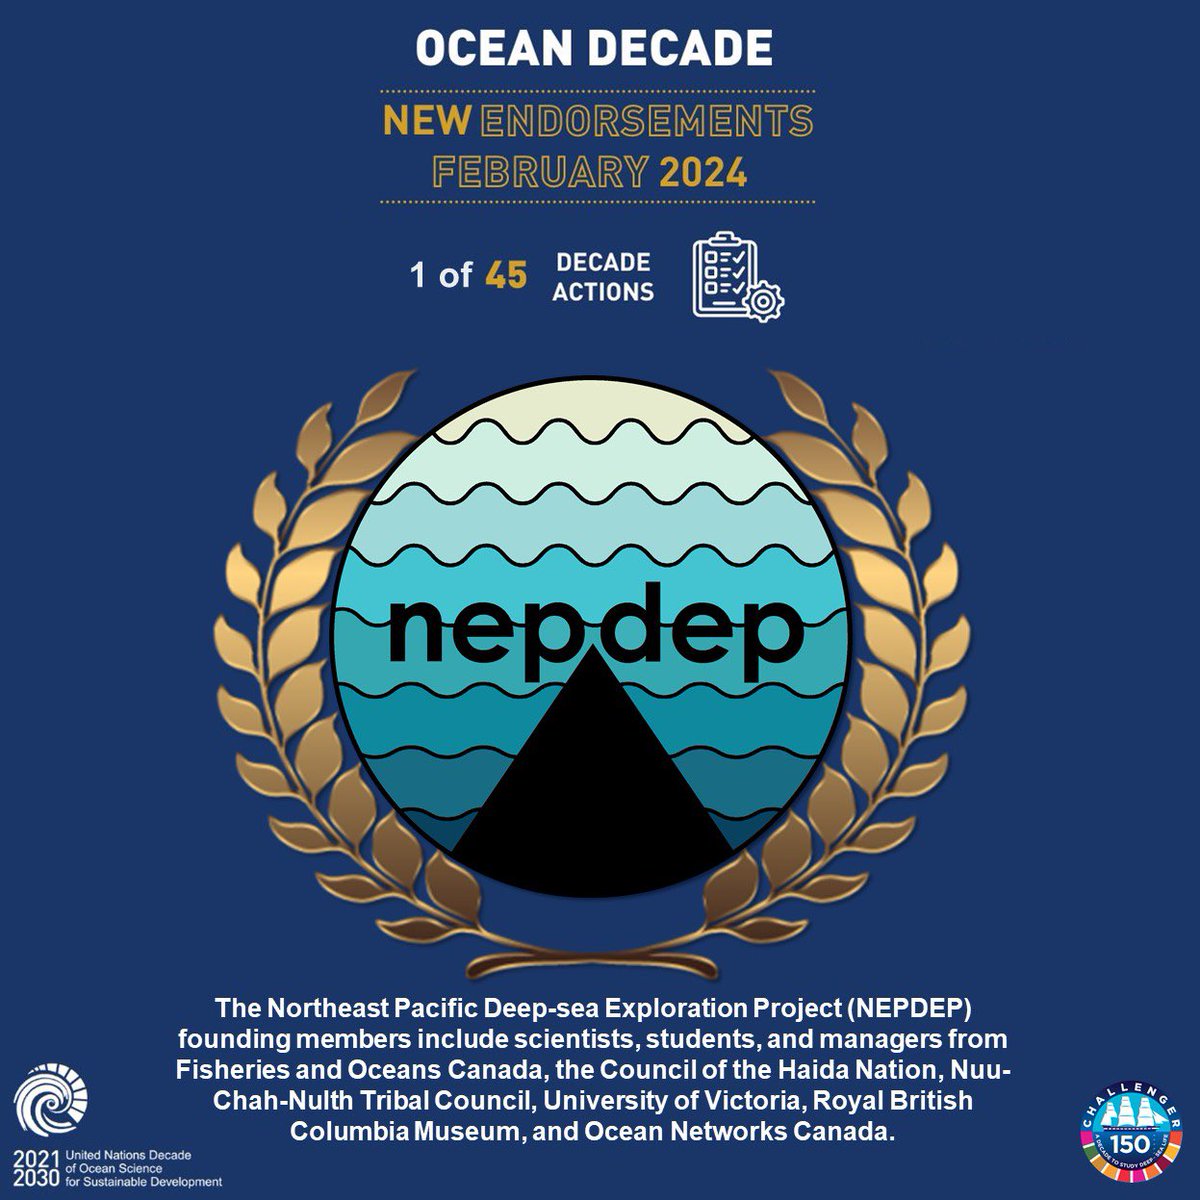 🥳 It’s official! Our grassroots #deepsea initiative is part of the #OceanDecade & @challenger_150 family! 🪸🐙🐳🦀🐟 Explore the new endorsed Actions here: ow.ly/I5fG50QBKai 💙 @FishOceansCAN @Uuathluk Haida Nation @uvic #nepdep @RoyalBCMuseum @Ocean_Networks 💙